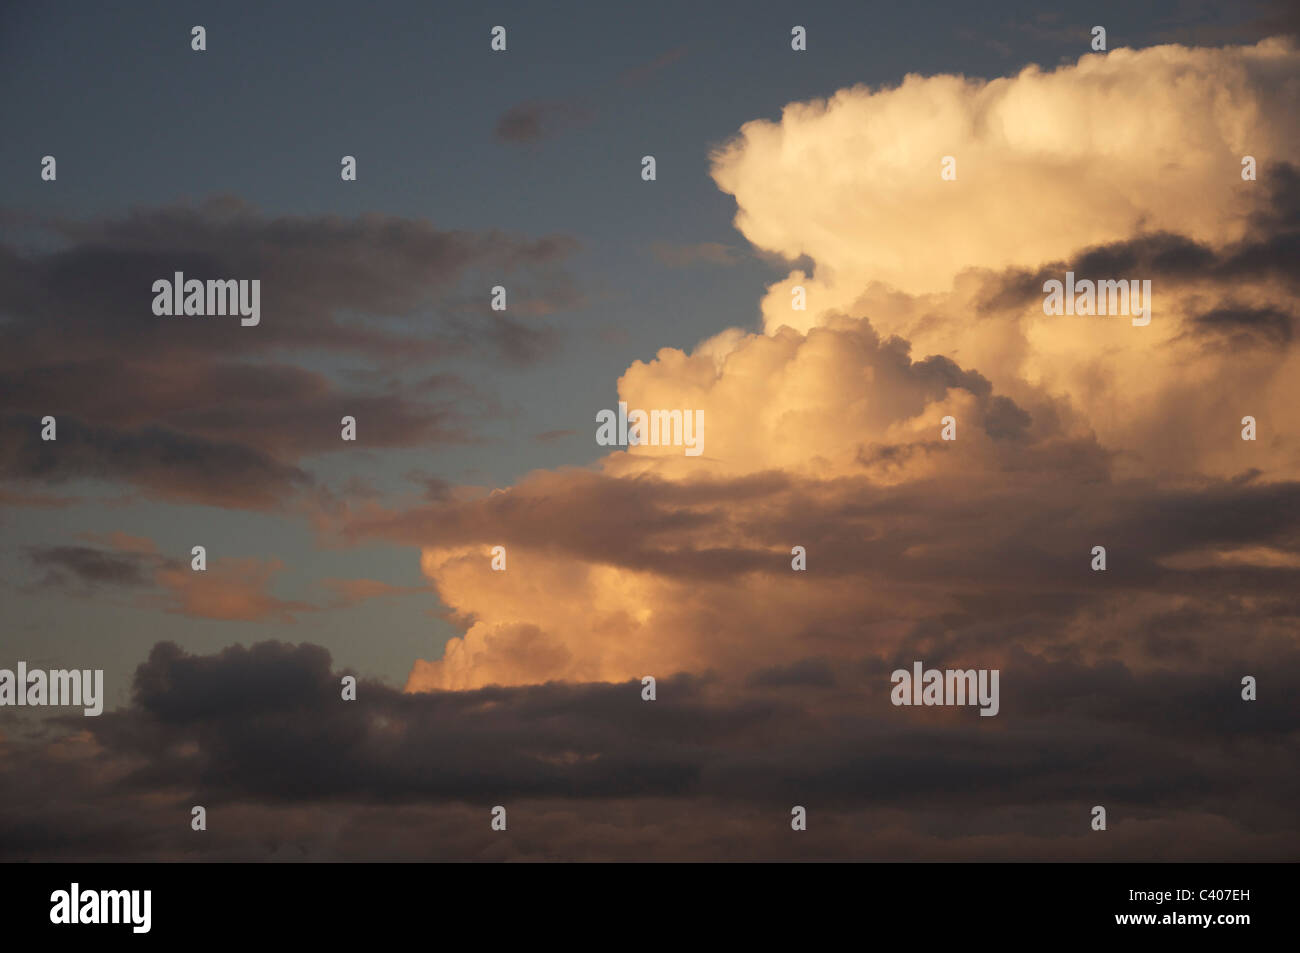 Frequently associated with thunderstorms. Cumulonimbus clouds over Southern England, catching the last rays of the setting sun. Weather, meteorology. Stock Photo